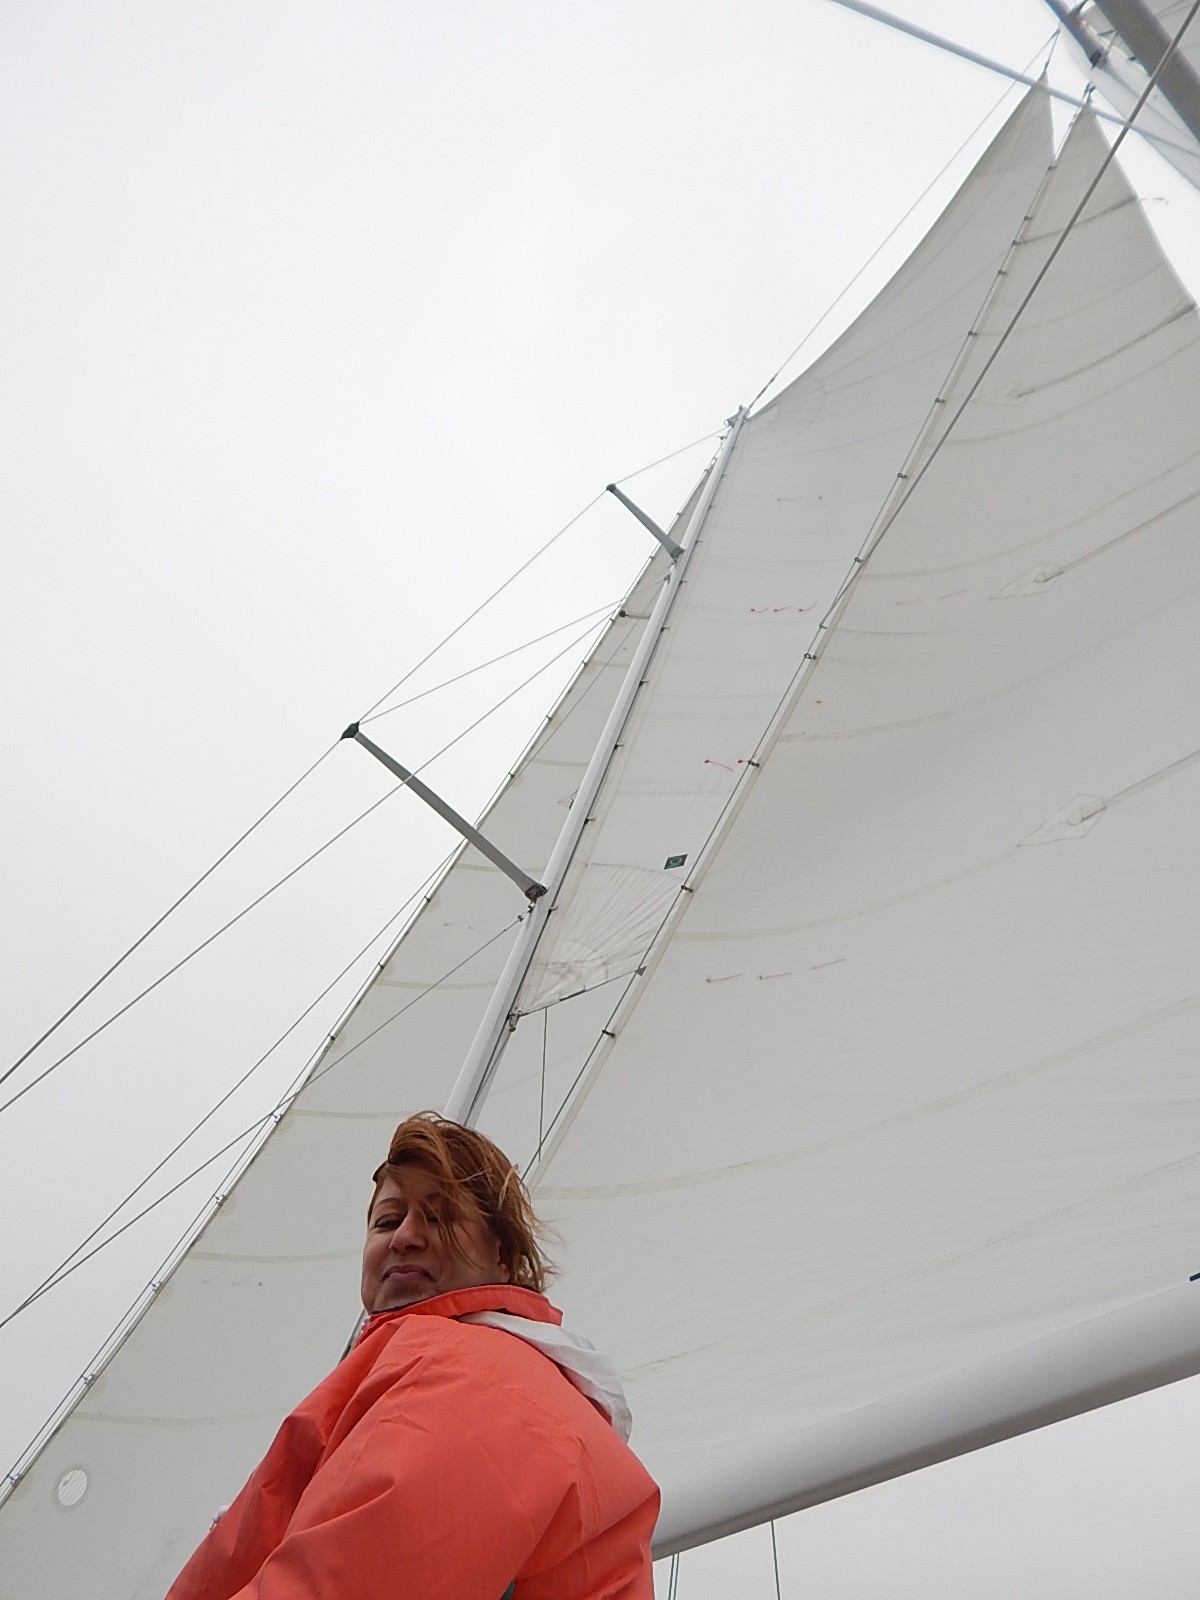 Sails full of wind and a guest in orange jacket looking at camera